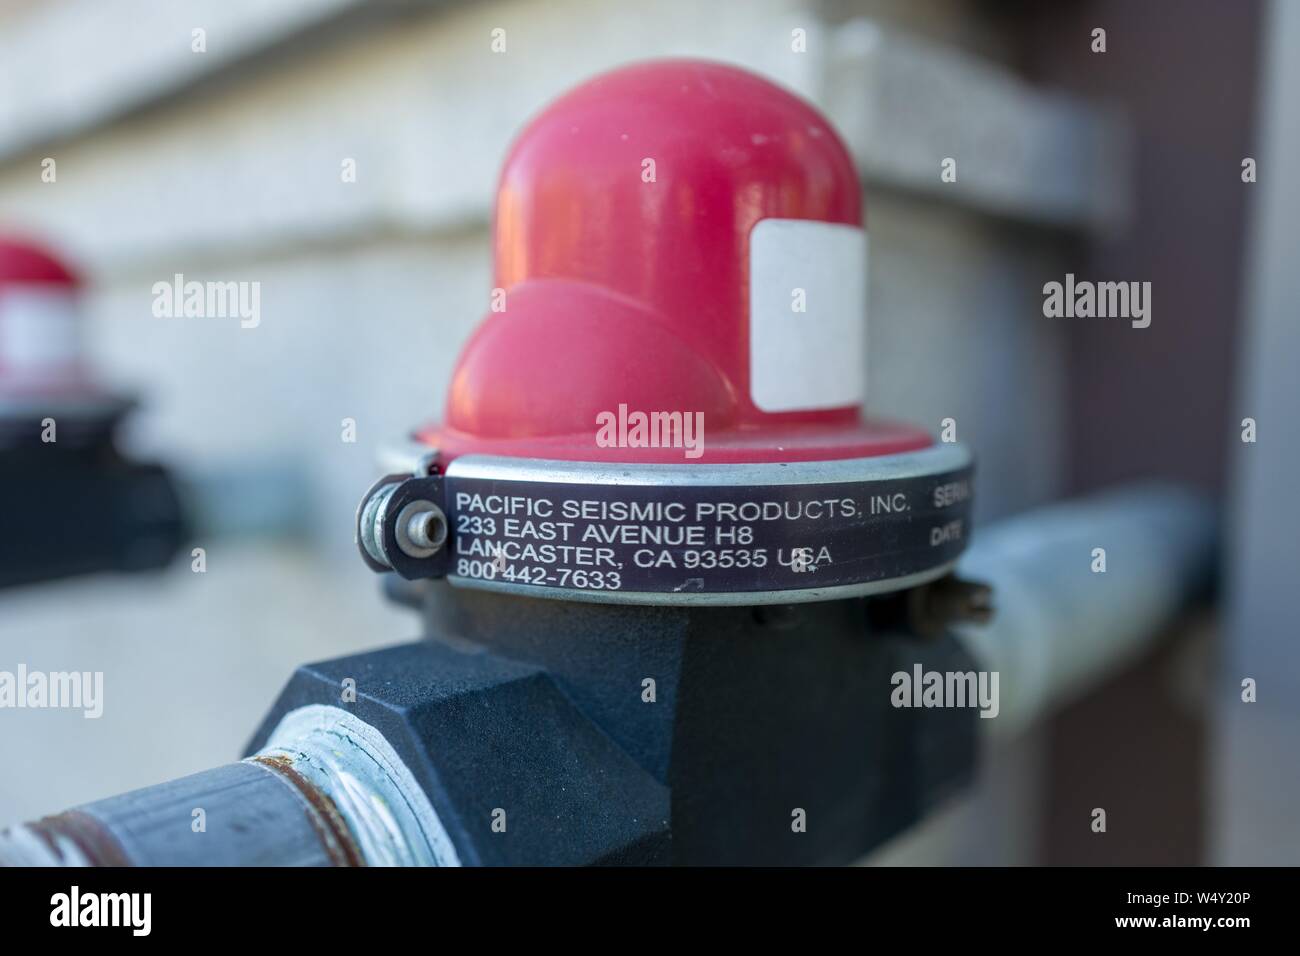 Close-up of automatic seismic natural gas shutoff valve from Pacific Seismic Products, used to automatically cut off the flow of natural gas during an earthquake, installed on a building in the San Francisco Bay Area, Lafayette, California, April 9, 2019. () Stock Photo